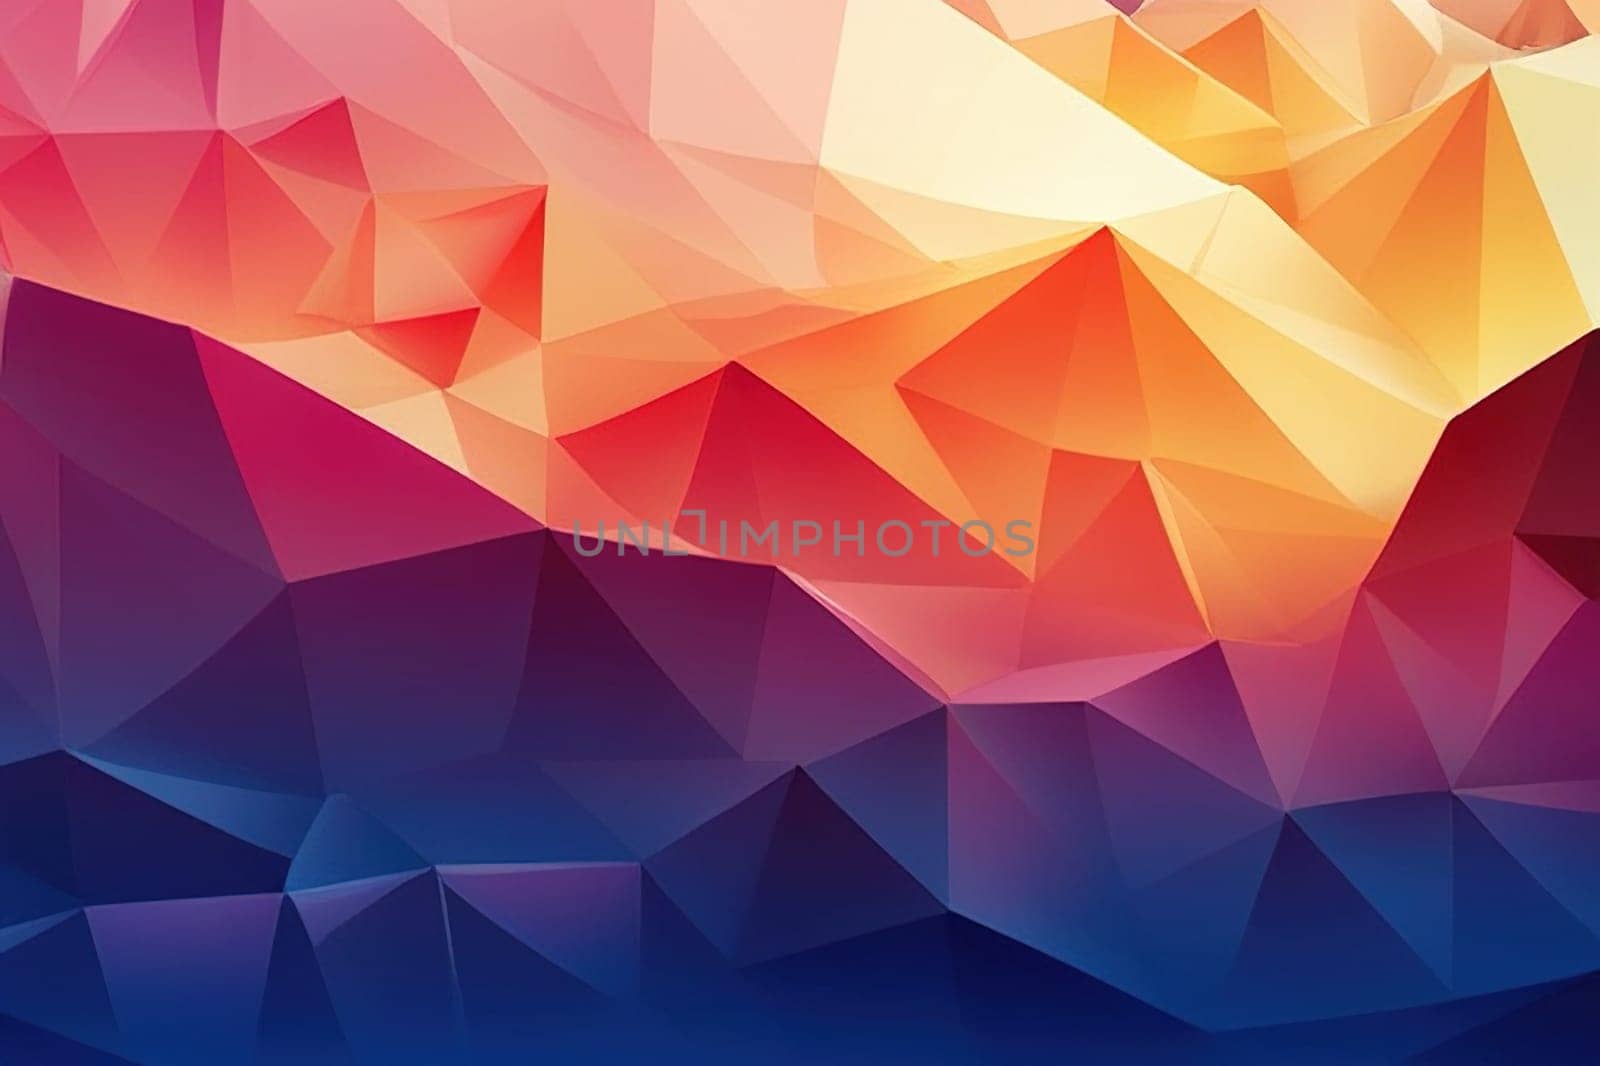 Abstract polygonal background of different color figures. Template for a text. Futuristic style geometric colorful triangle texture illustration.